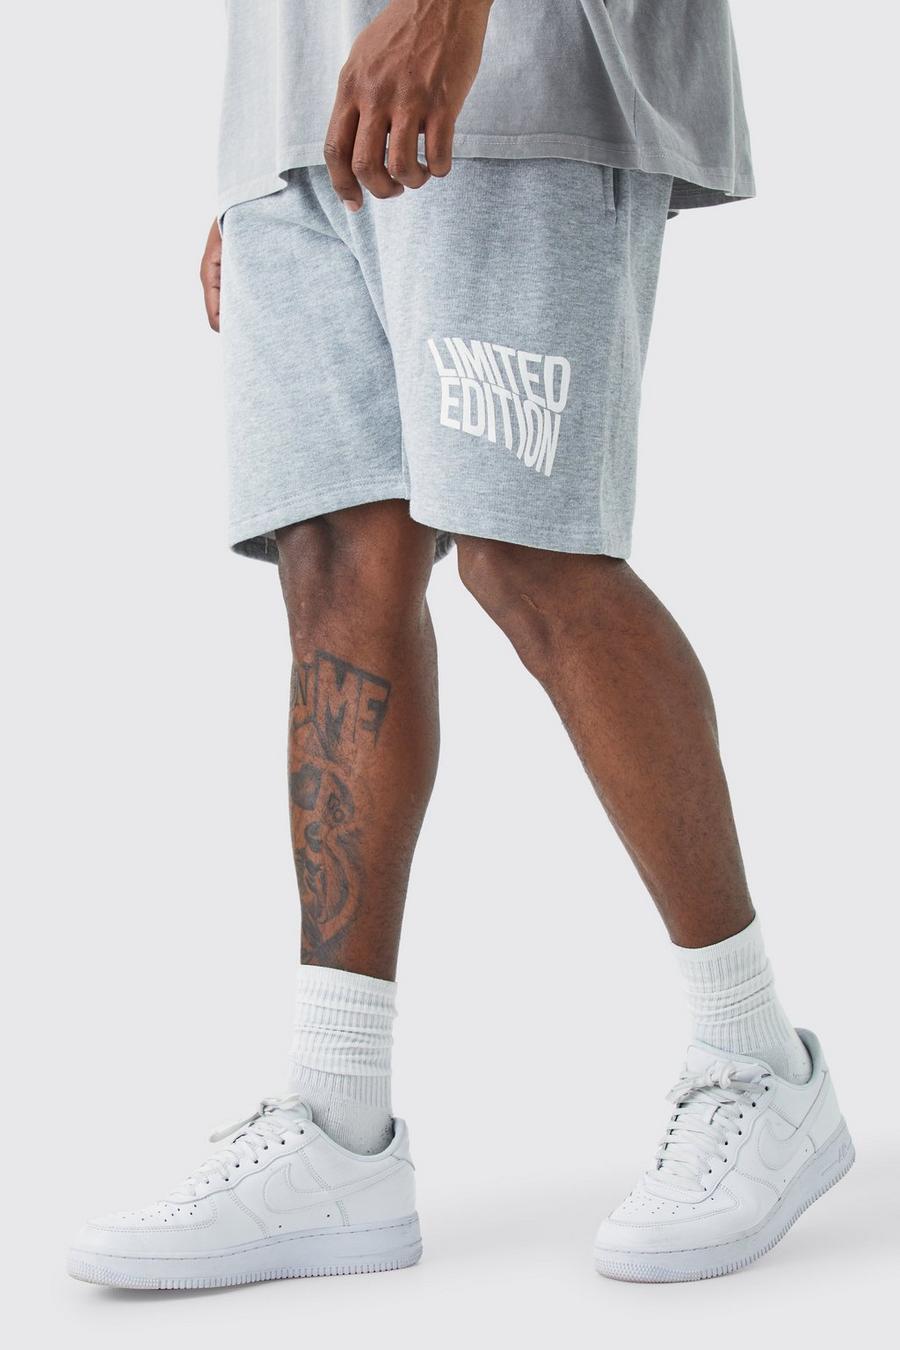 Plus lockere Limited Edition Shorts in Grau, Grey image number 1